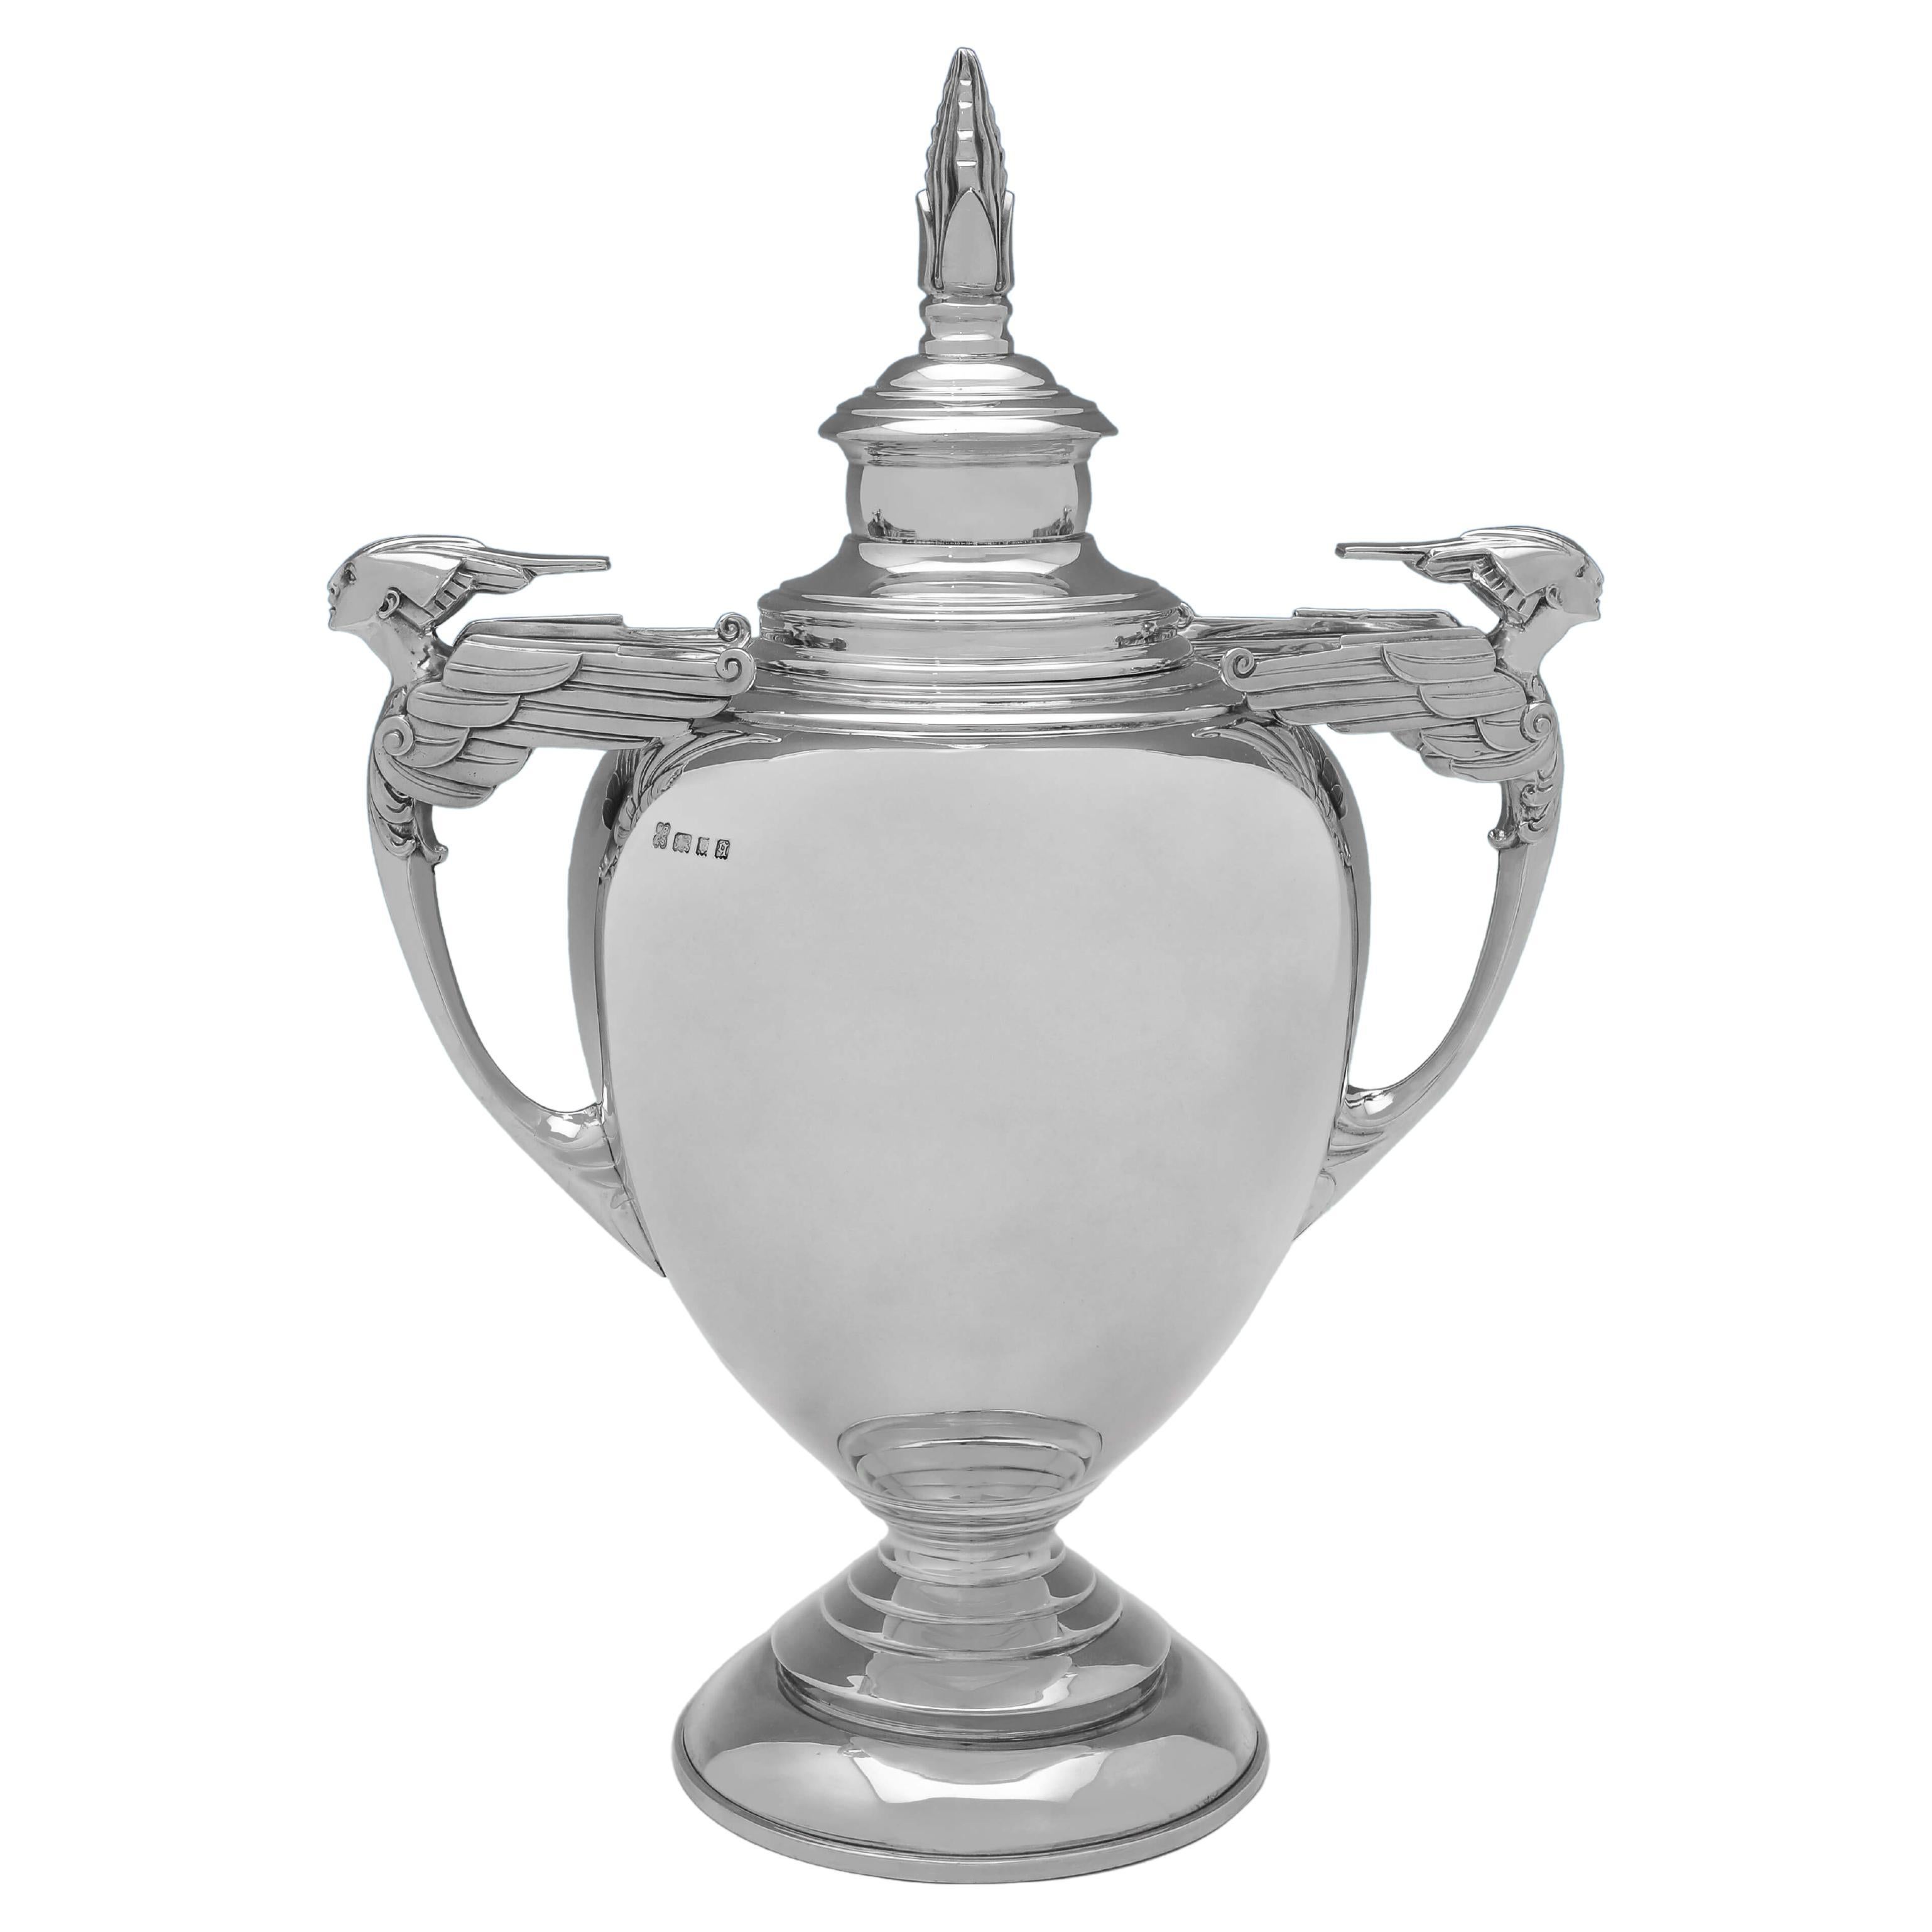 Amazing Art Deco Period Sterling Silver Trophy - Hallmarked in 1931 For Sale